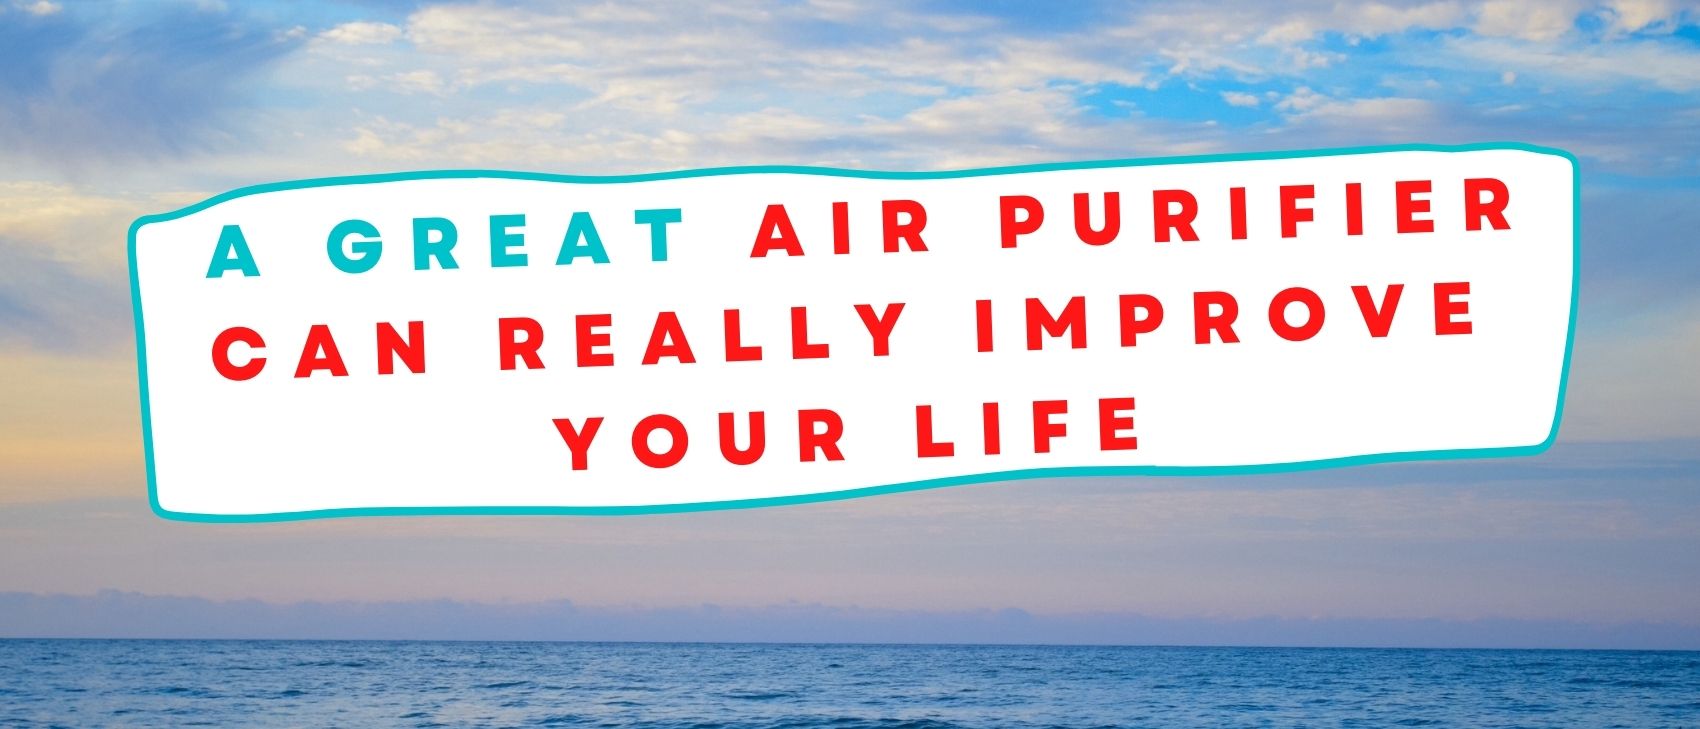 A Great Air Purifier Can Really Improve Your Life